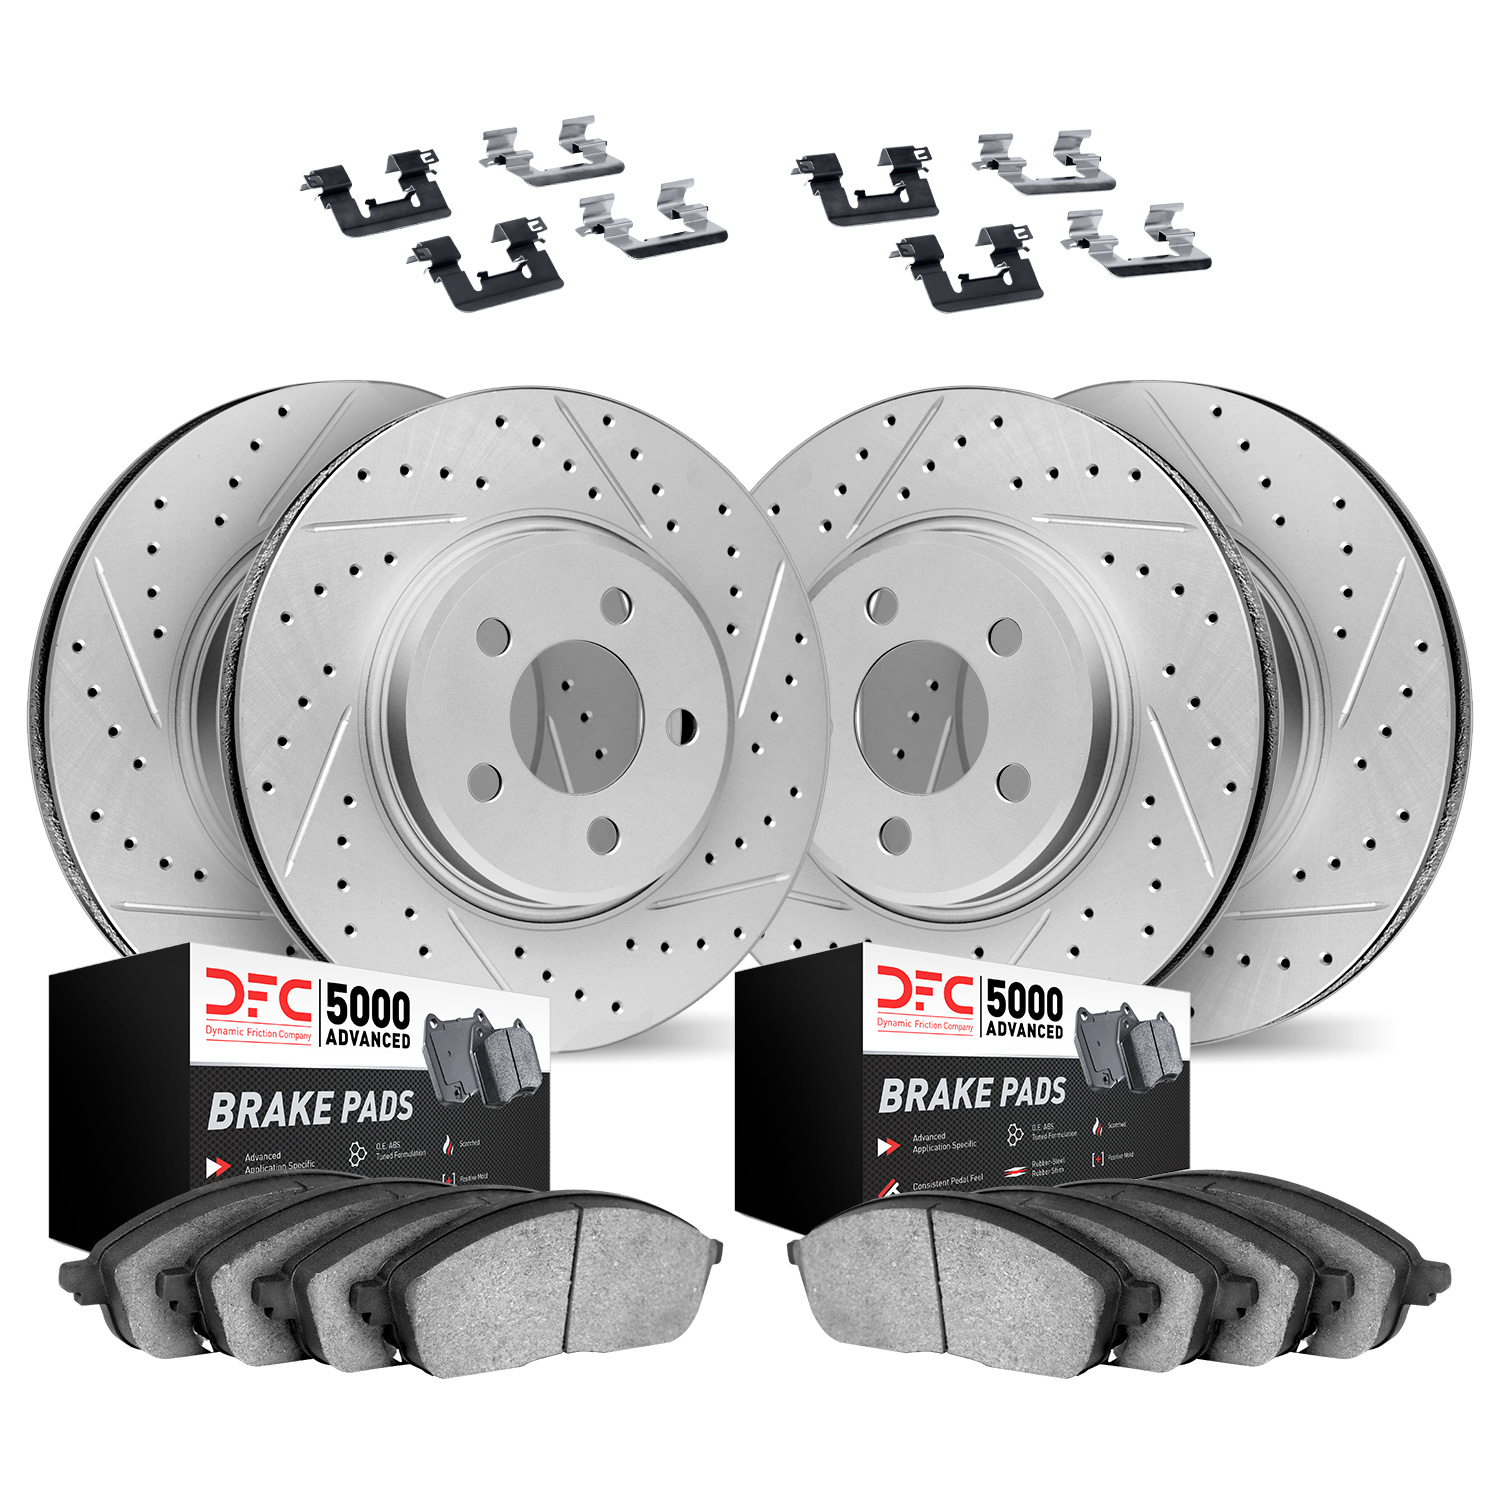 2514-31027 Geoperformance Drilled/Slotted Rotors w/5000 Advanced Brake Pads Kit & Hardware, 2012-2016 BMW, Position: Front and R